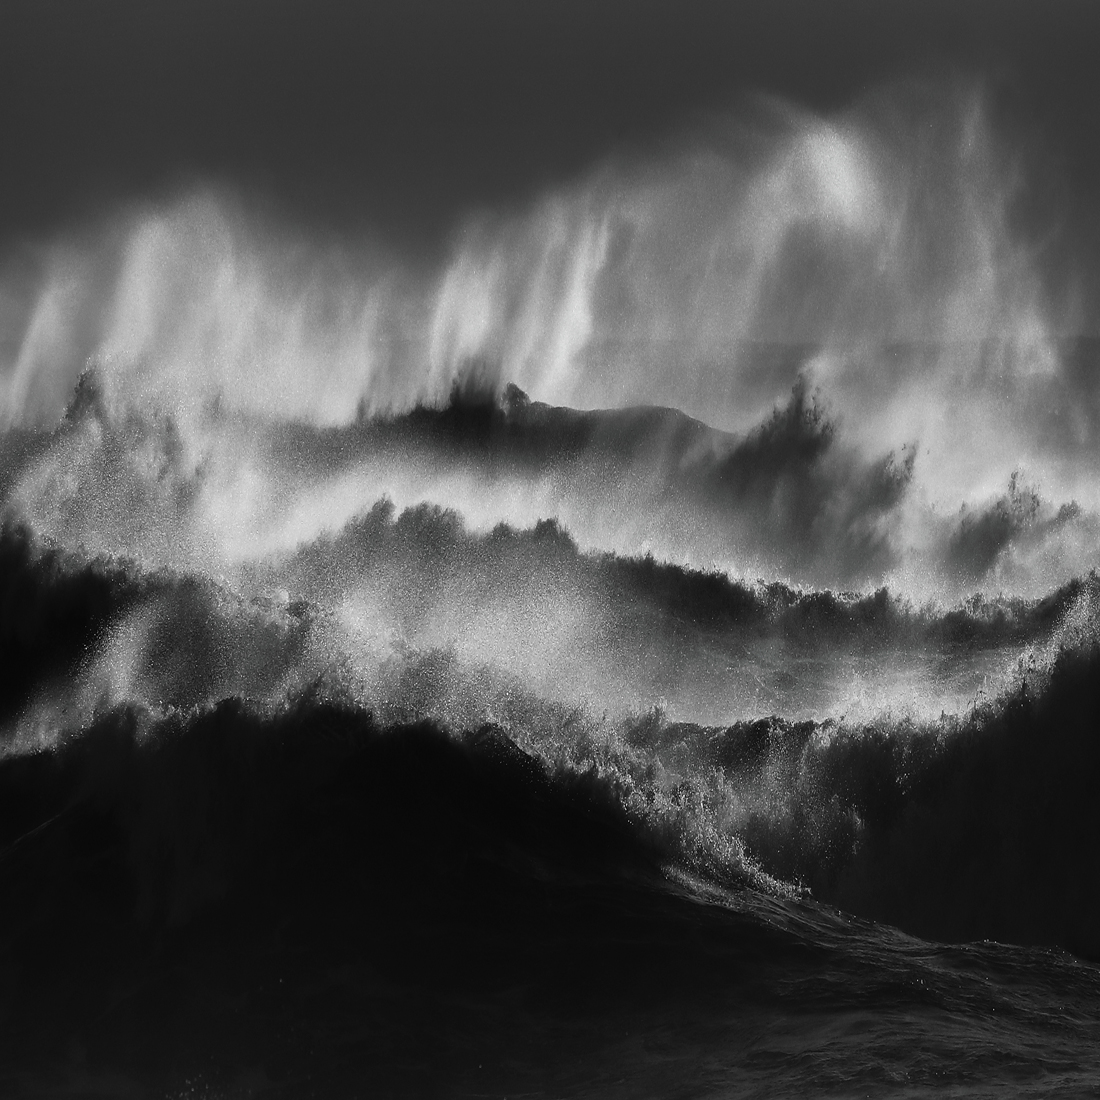 1ST PLACE - Black & White Nature and Wildlife SerieS of the Year 2019, Ocean - Romain Tornay